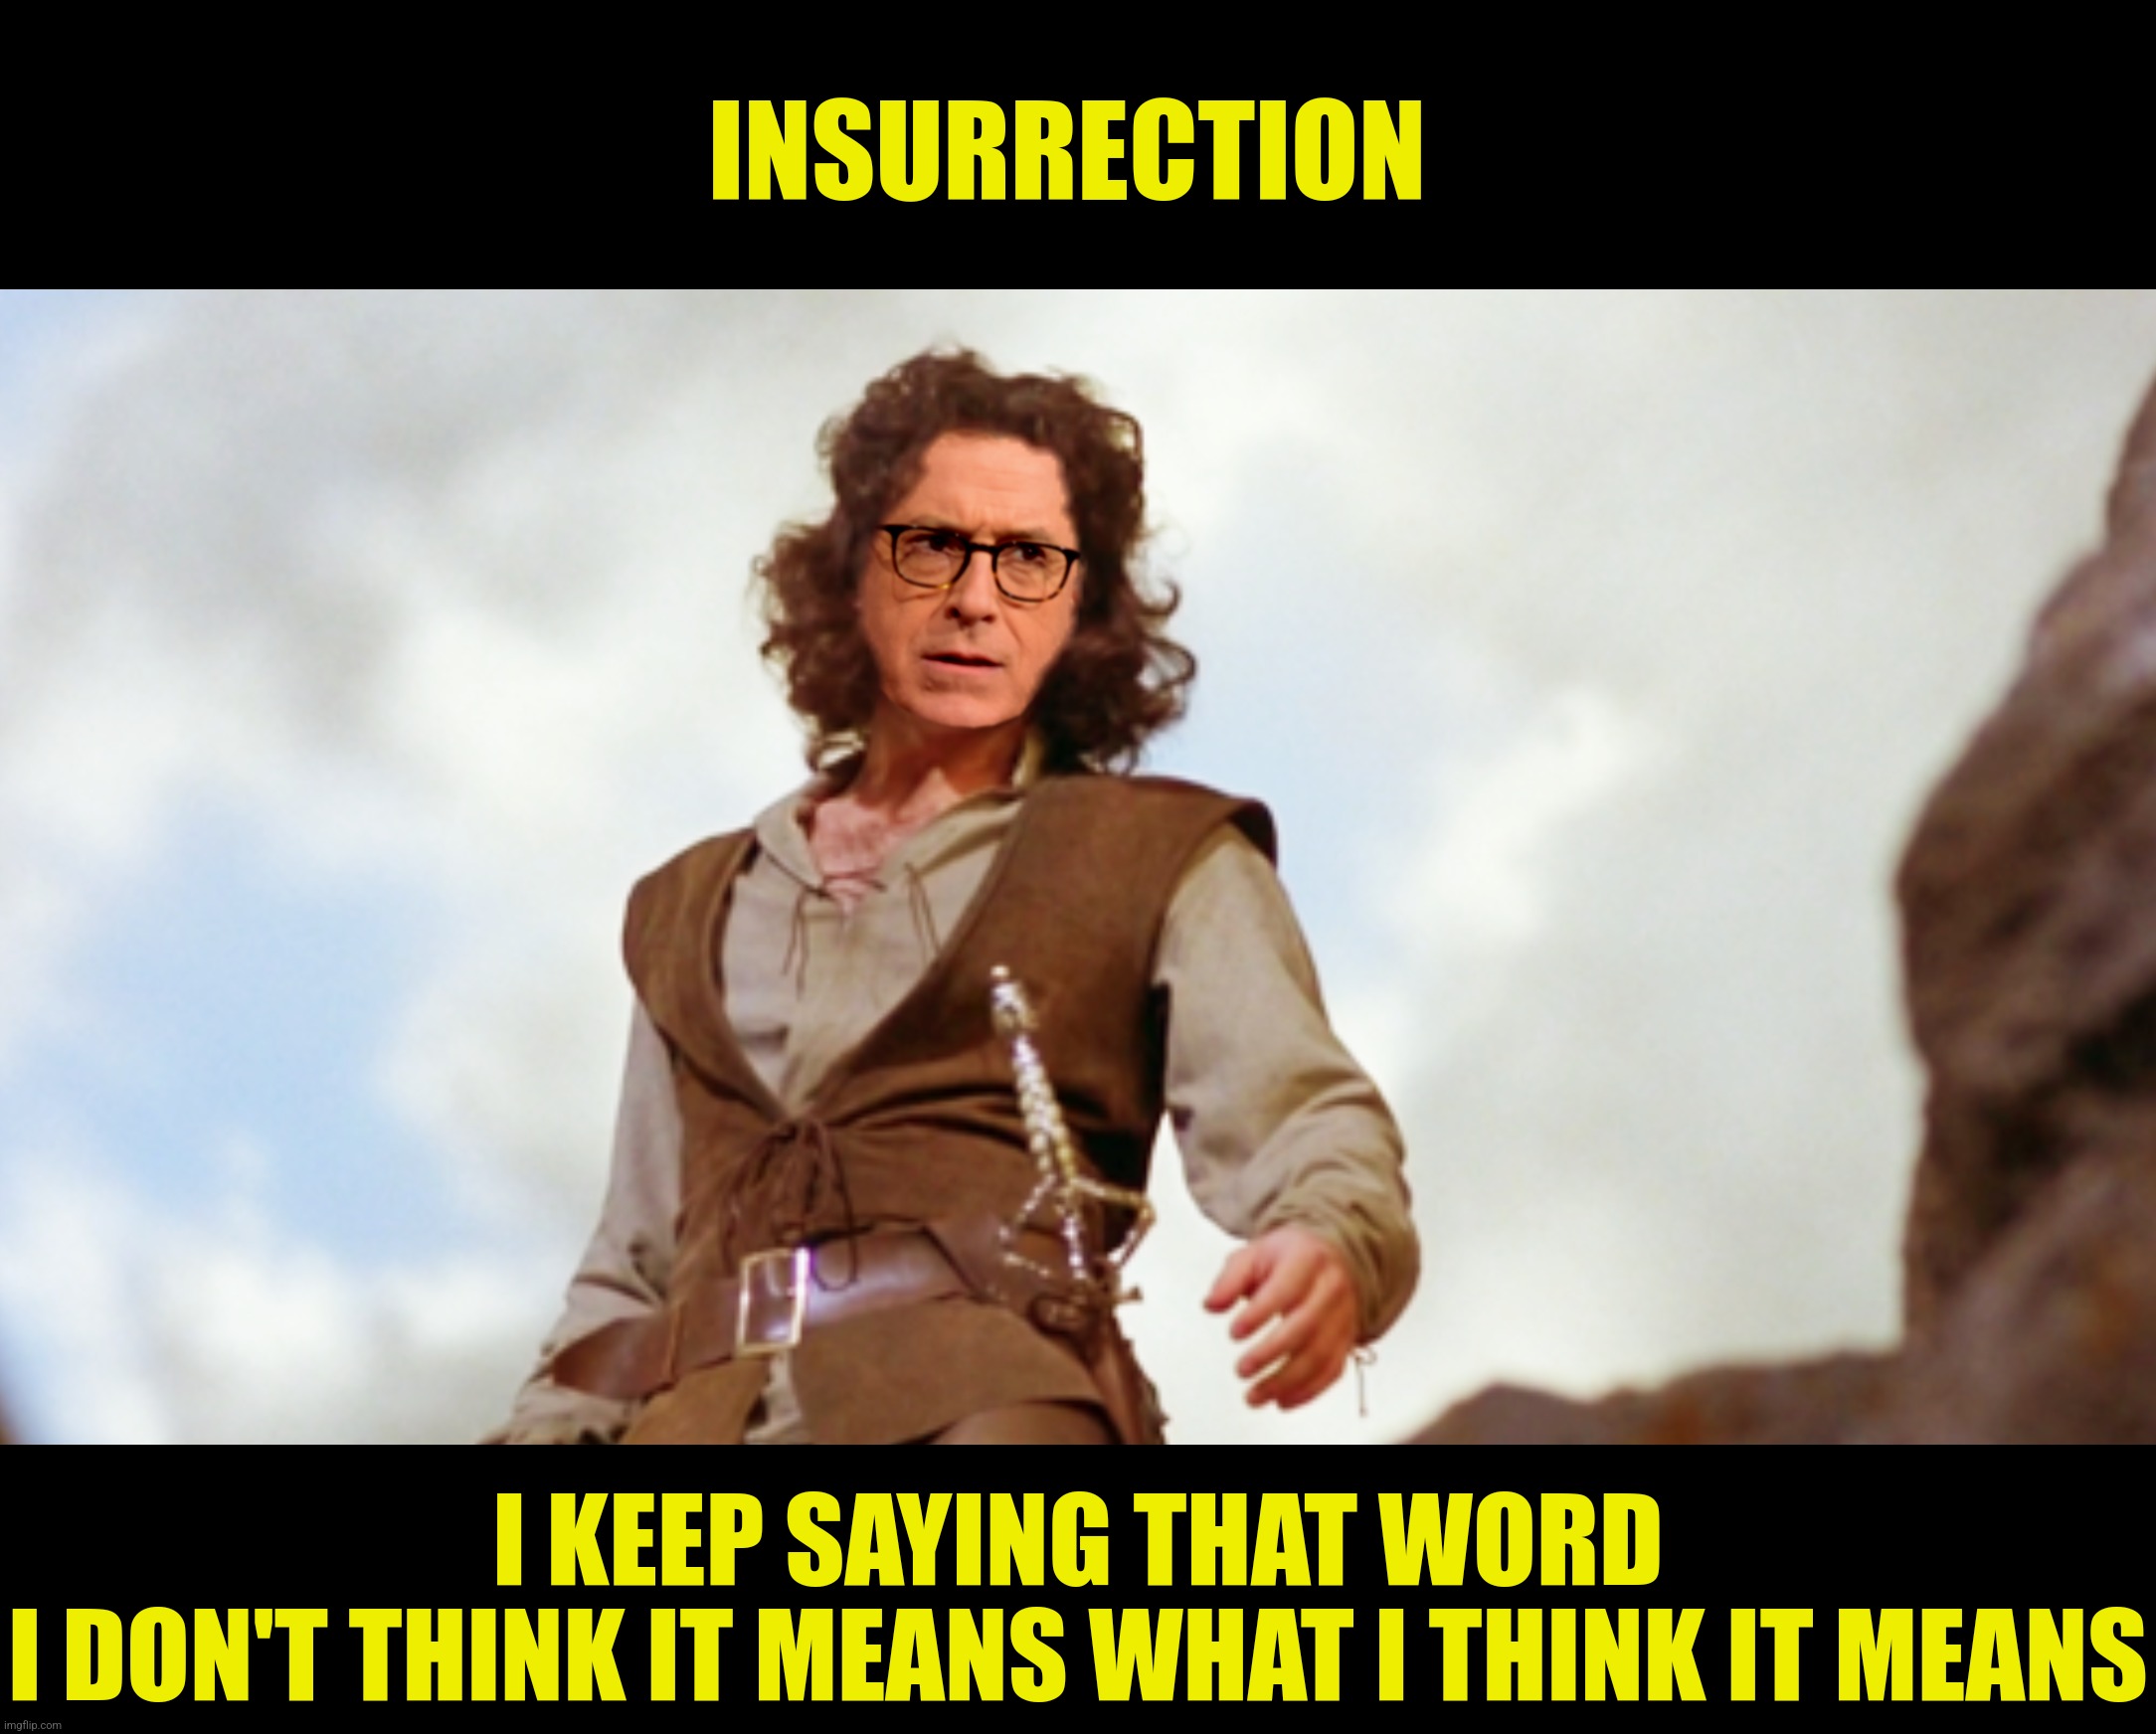 INSURRECTION I KEEP SAYING THAT WORD
I DON'T THINK IT MEANS WHAT I THINK IT MEANS | made w/ Imgflip meme maker